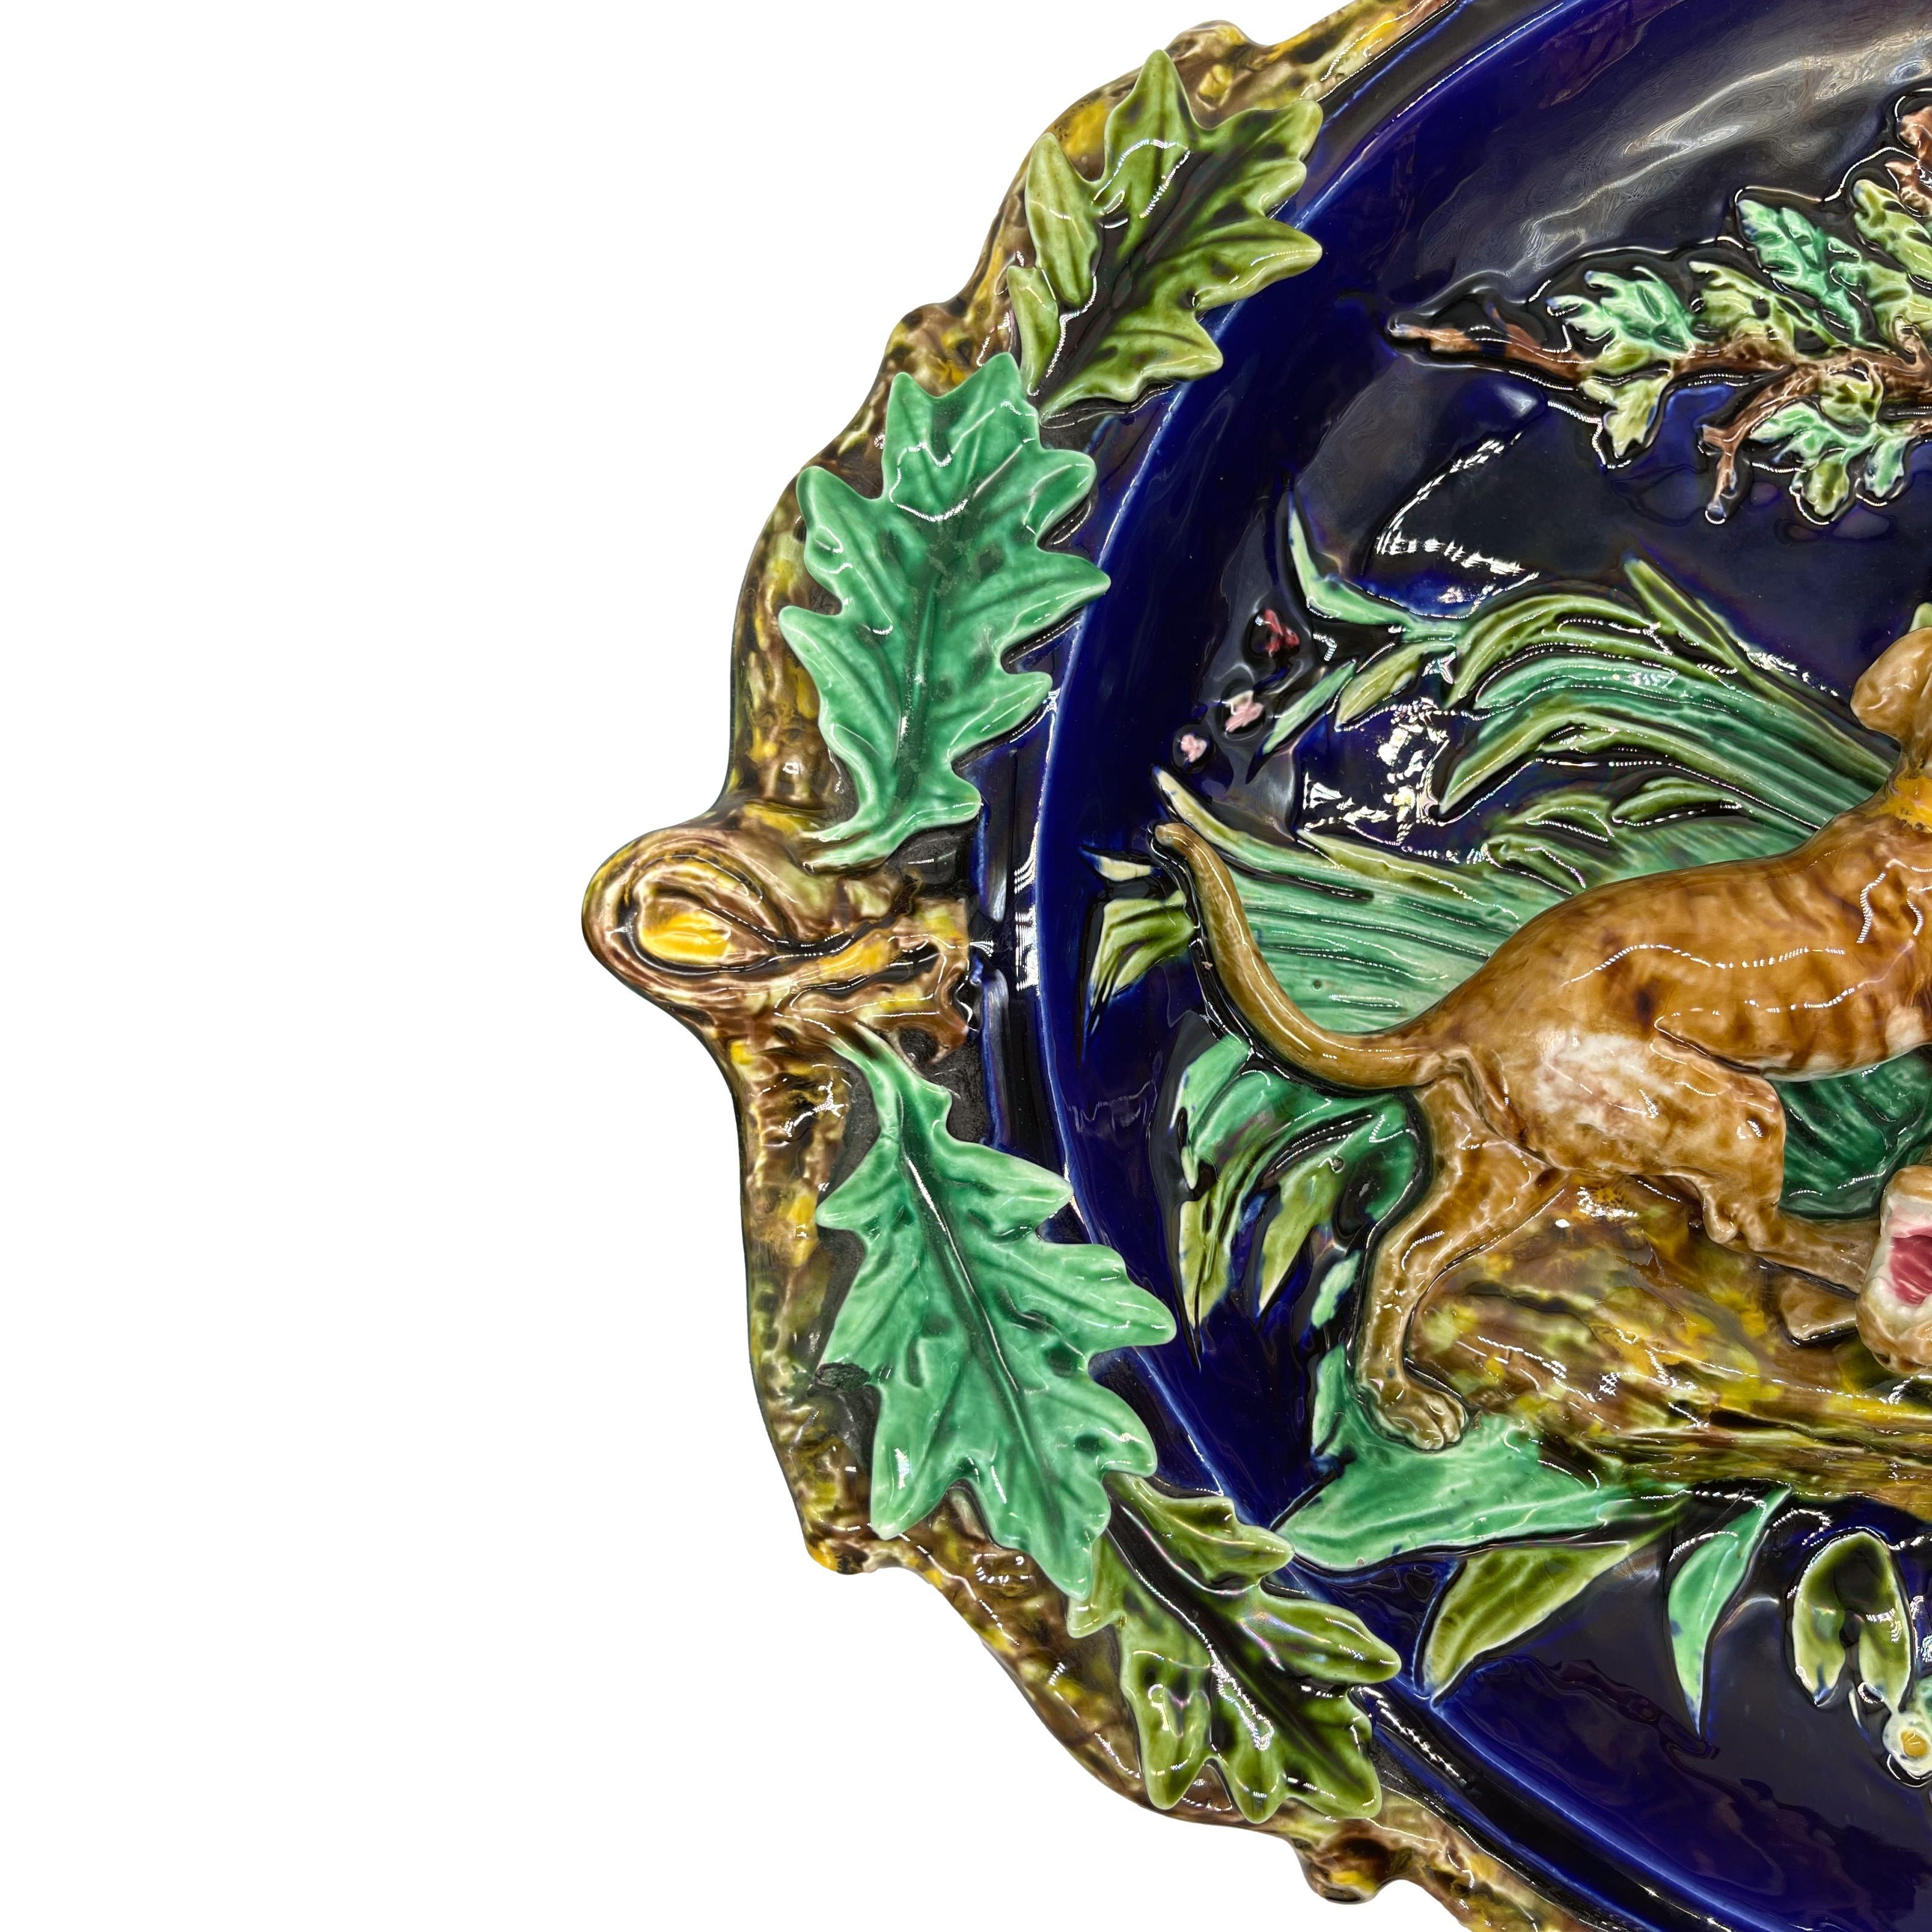 Sarreguemines Barbotine (French majolica) Monumental Trompe l'oeil Game Plaque, the relief-molded concave platter with applied hunting hounds and a wolf in a violent struggle in a woodland setting, with branch-form rim terminating in knots which